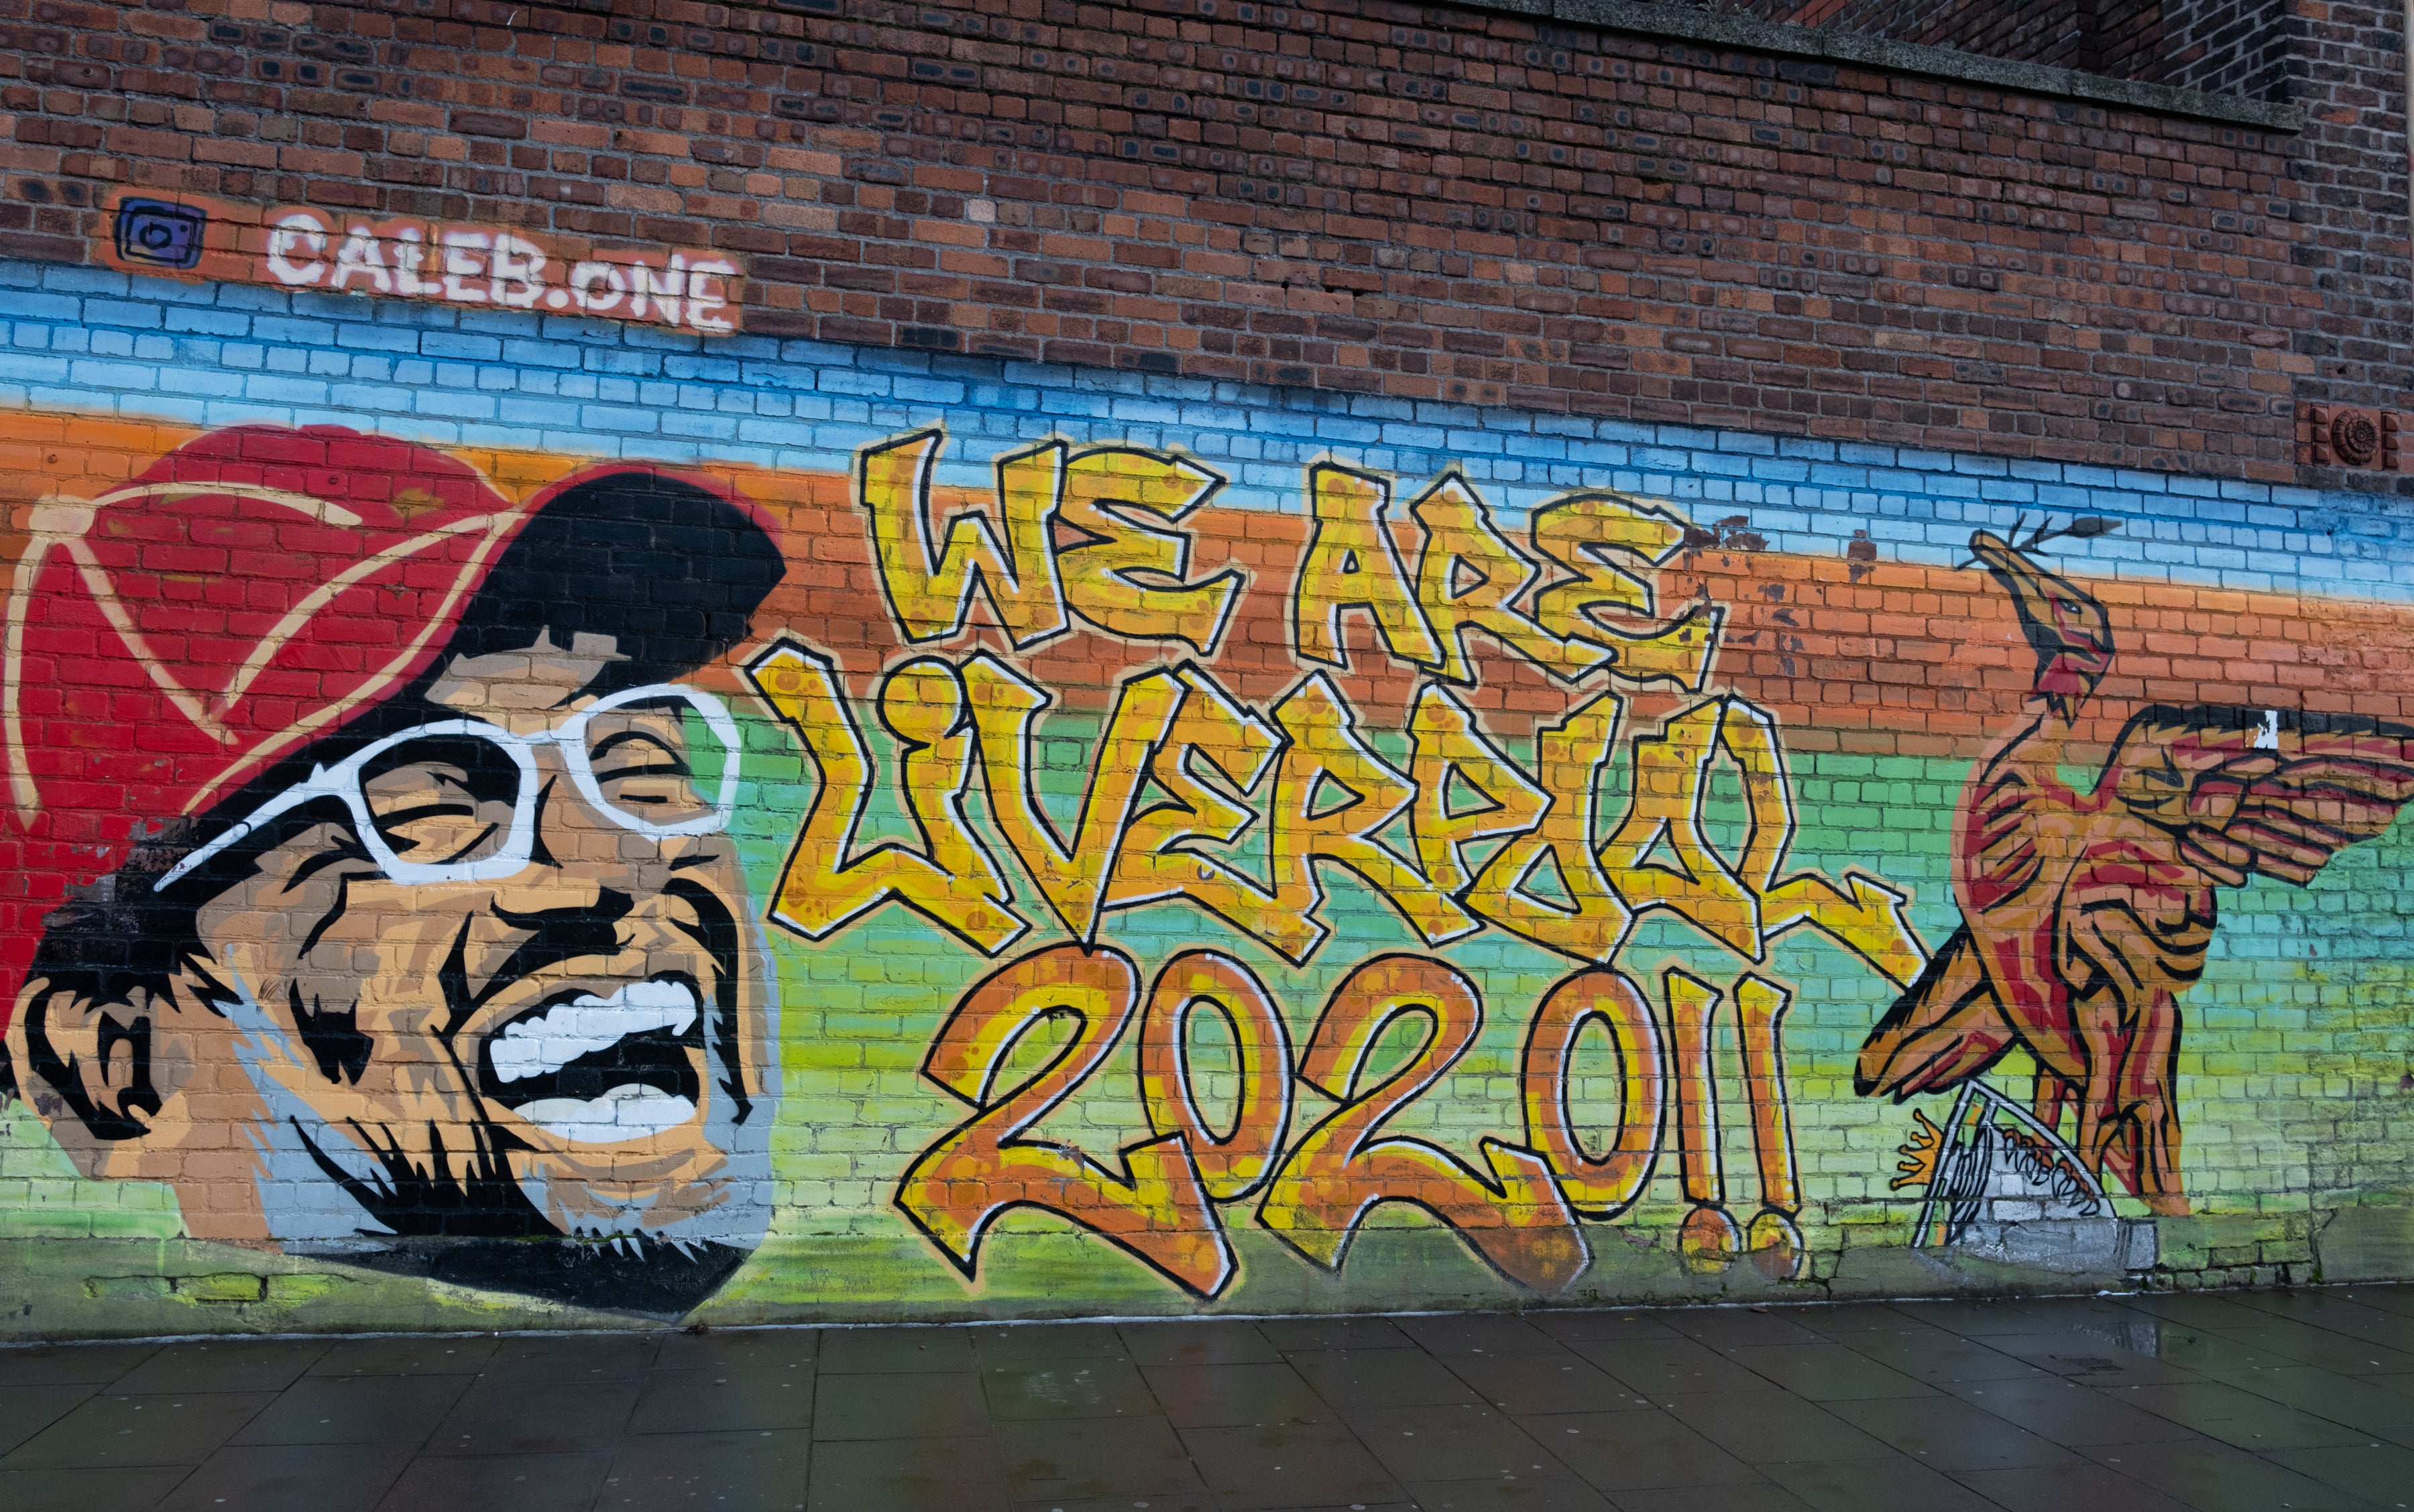 Liverpool manager Jurgen Klopp immortalised in the Baltic Triangle